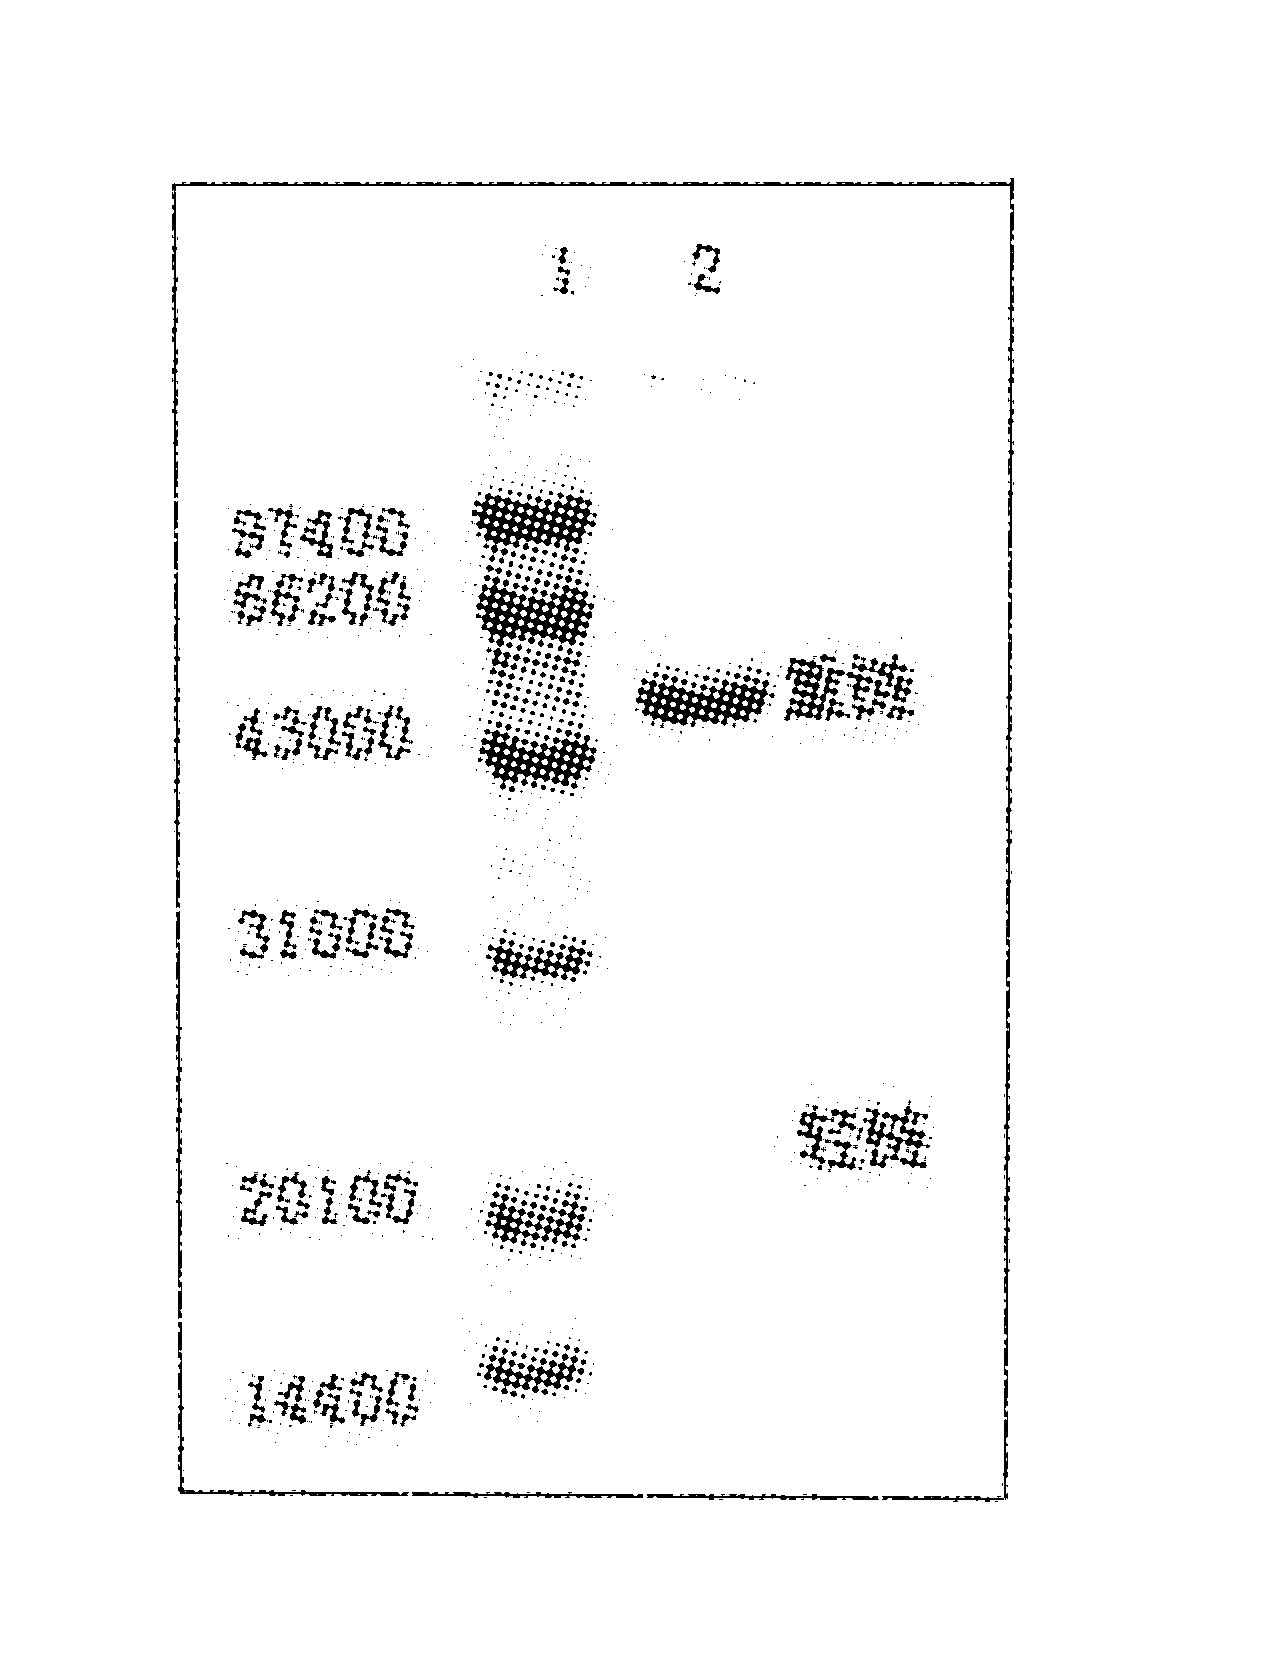 Antigen epitope of gold staphylococcus virulence factor regulatory protein and its mimic epitope and use thereof